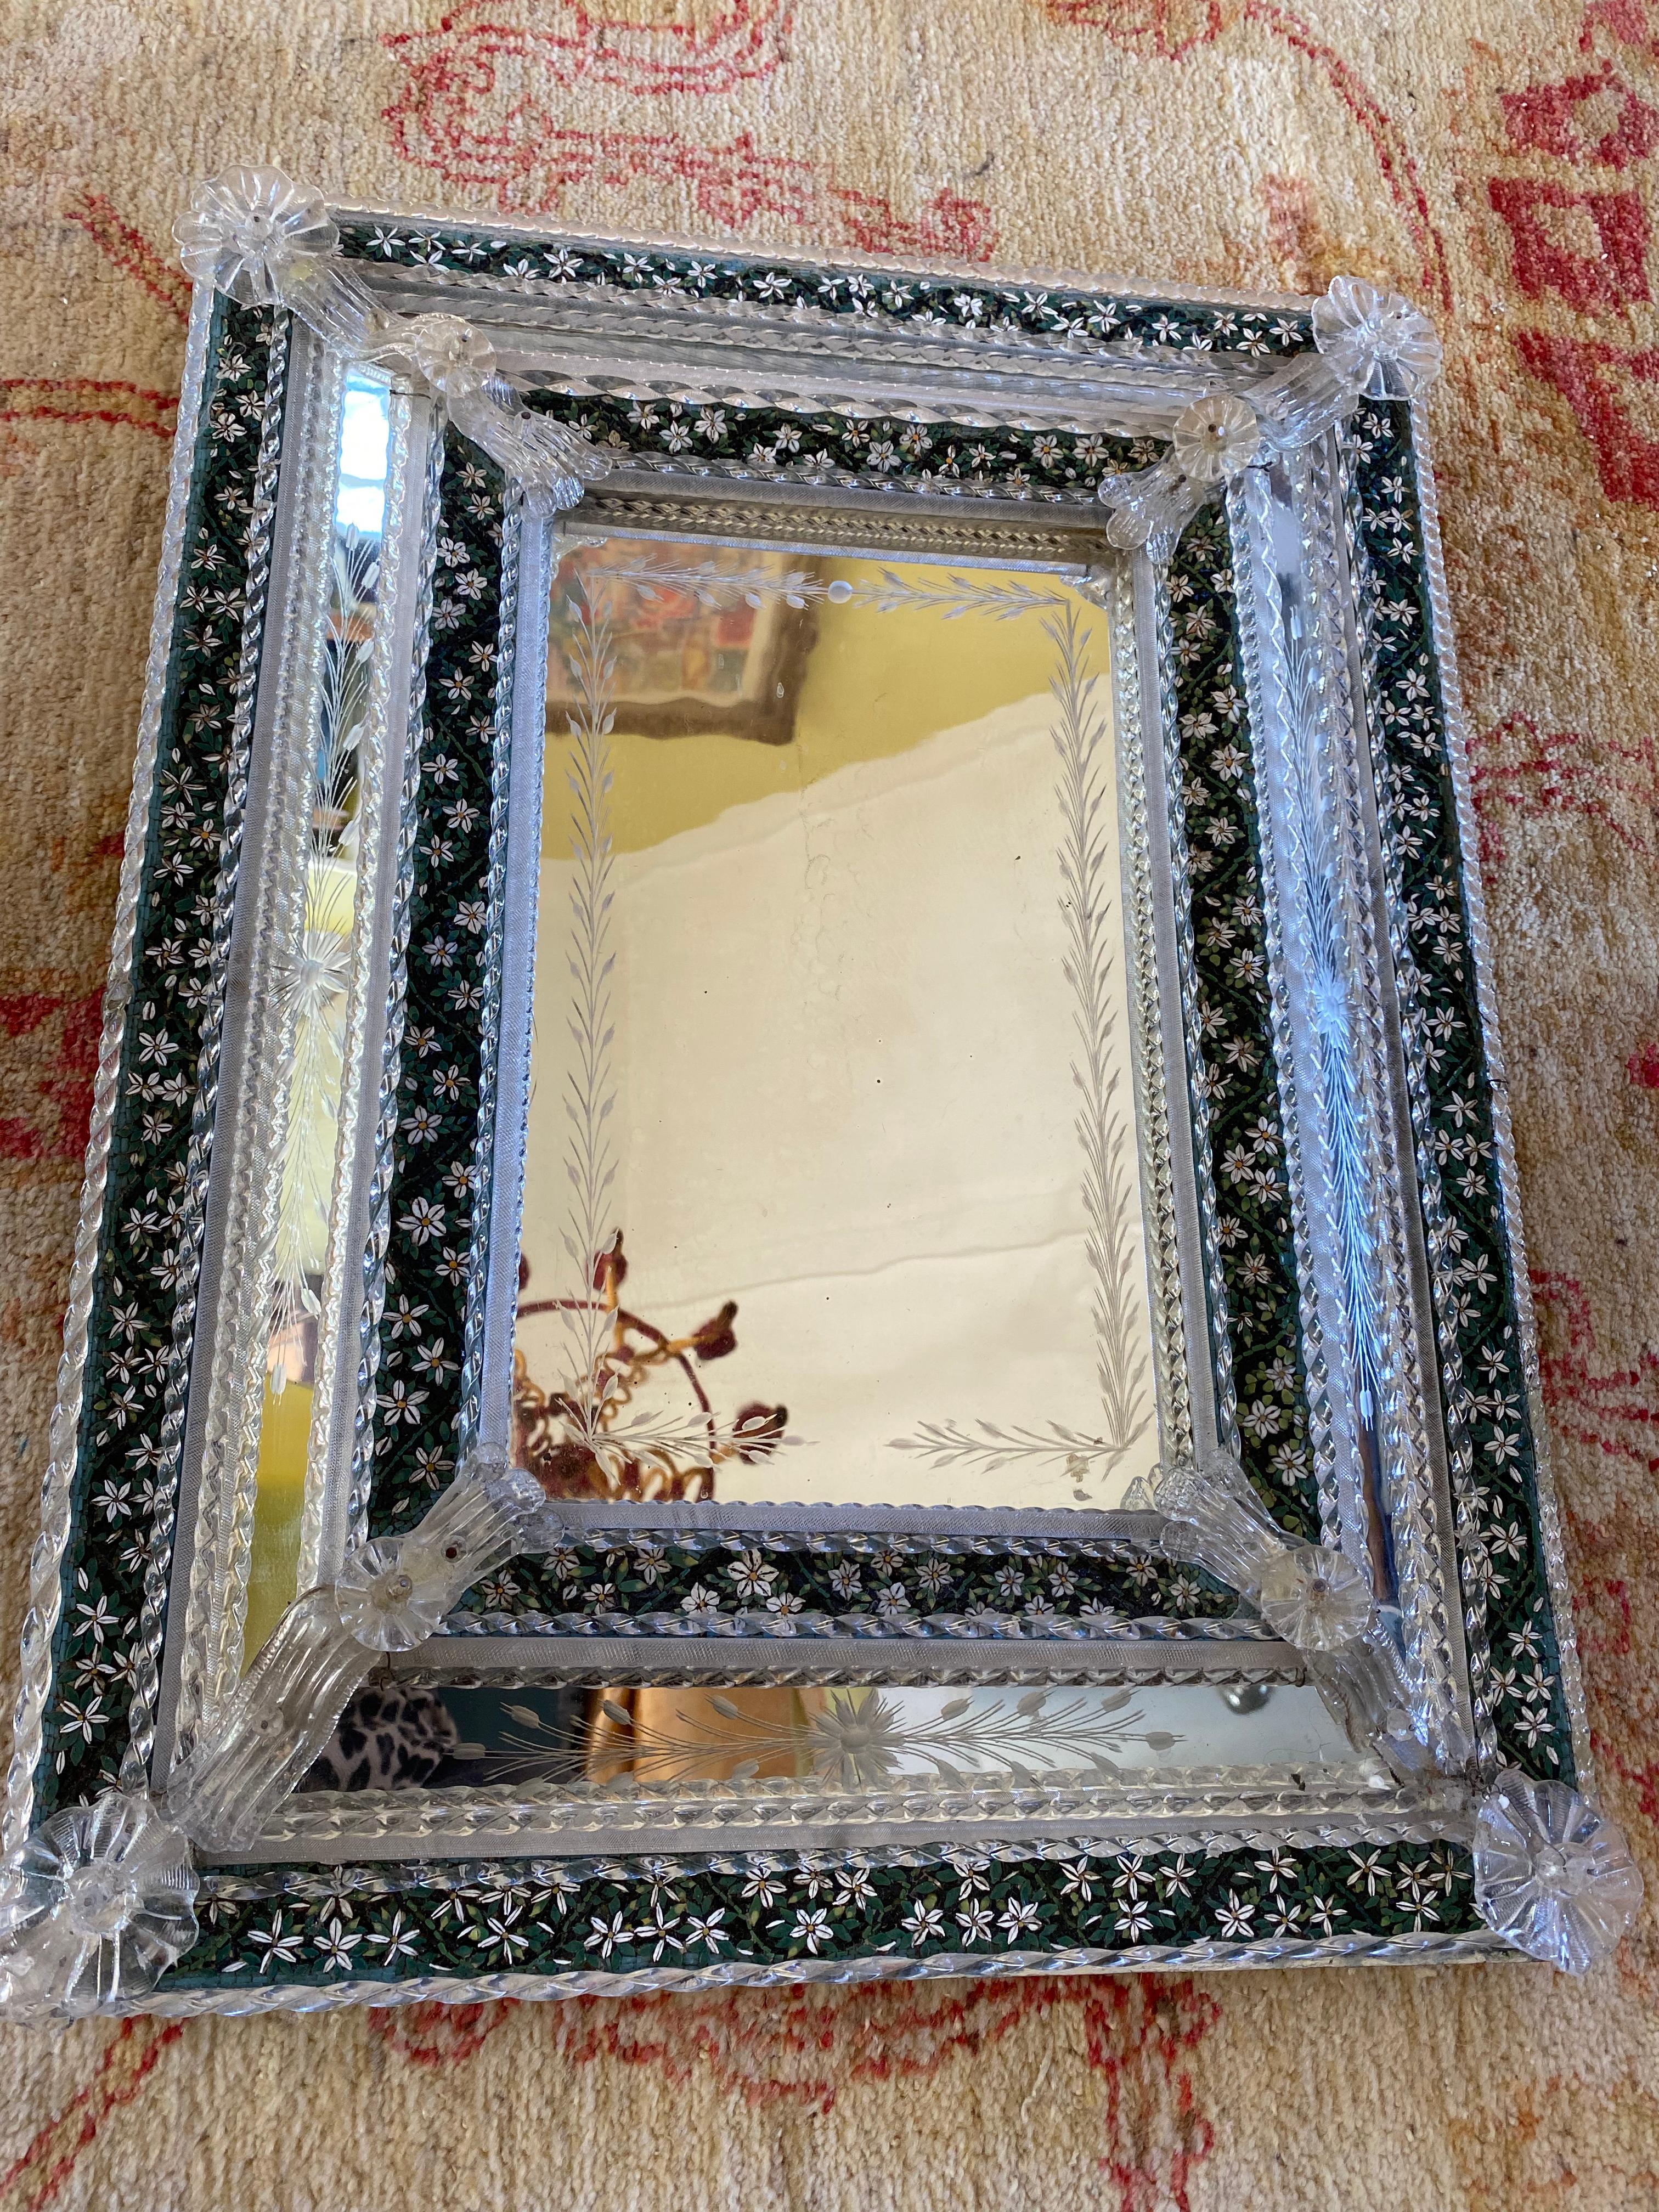 Rare Venetian etched Mirror with micro mosaic in pate de verre, details all over of blown glass and twisted baguettes It is set in a wooden frame. The micro mosaic of this piece is probably a Venetian work dated around 1870. The micro mosaic is an